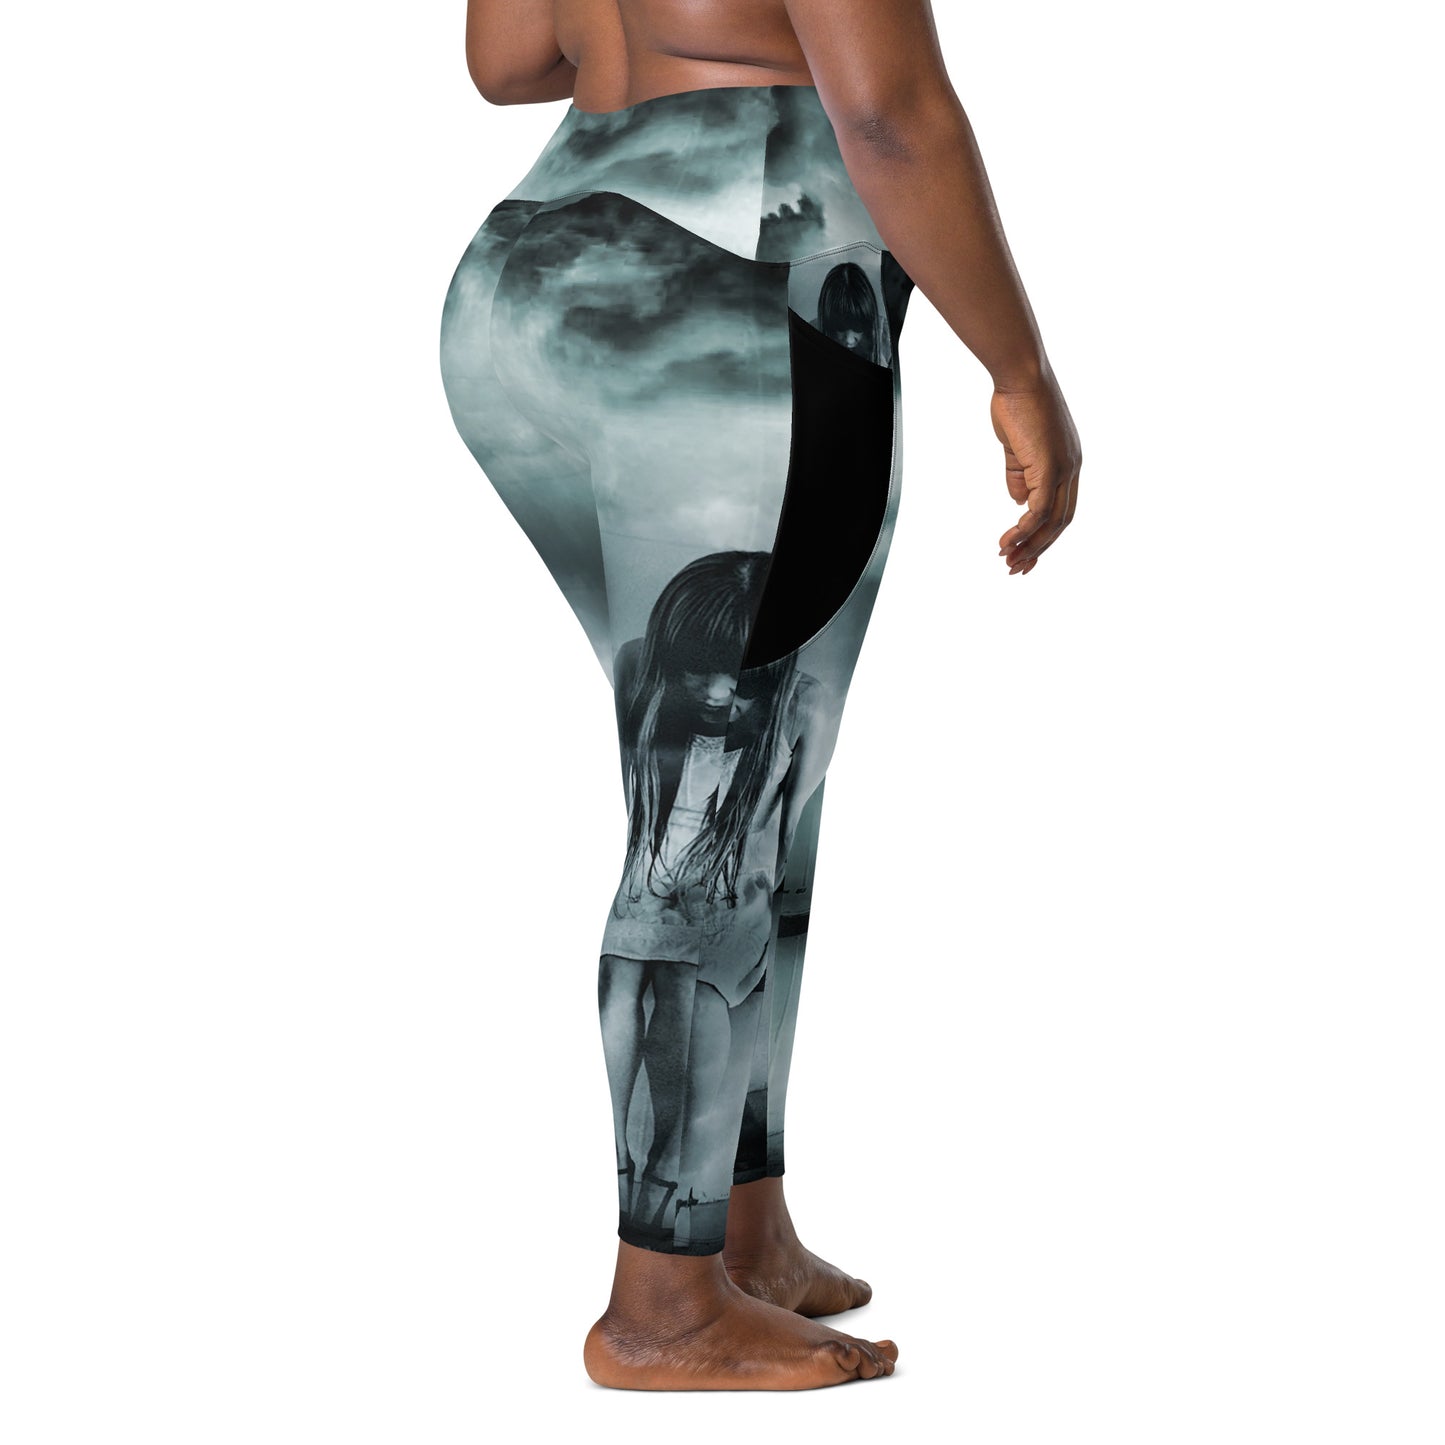 Clouded Judgment Leggings with Pockets - Plus Size